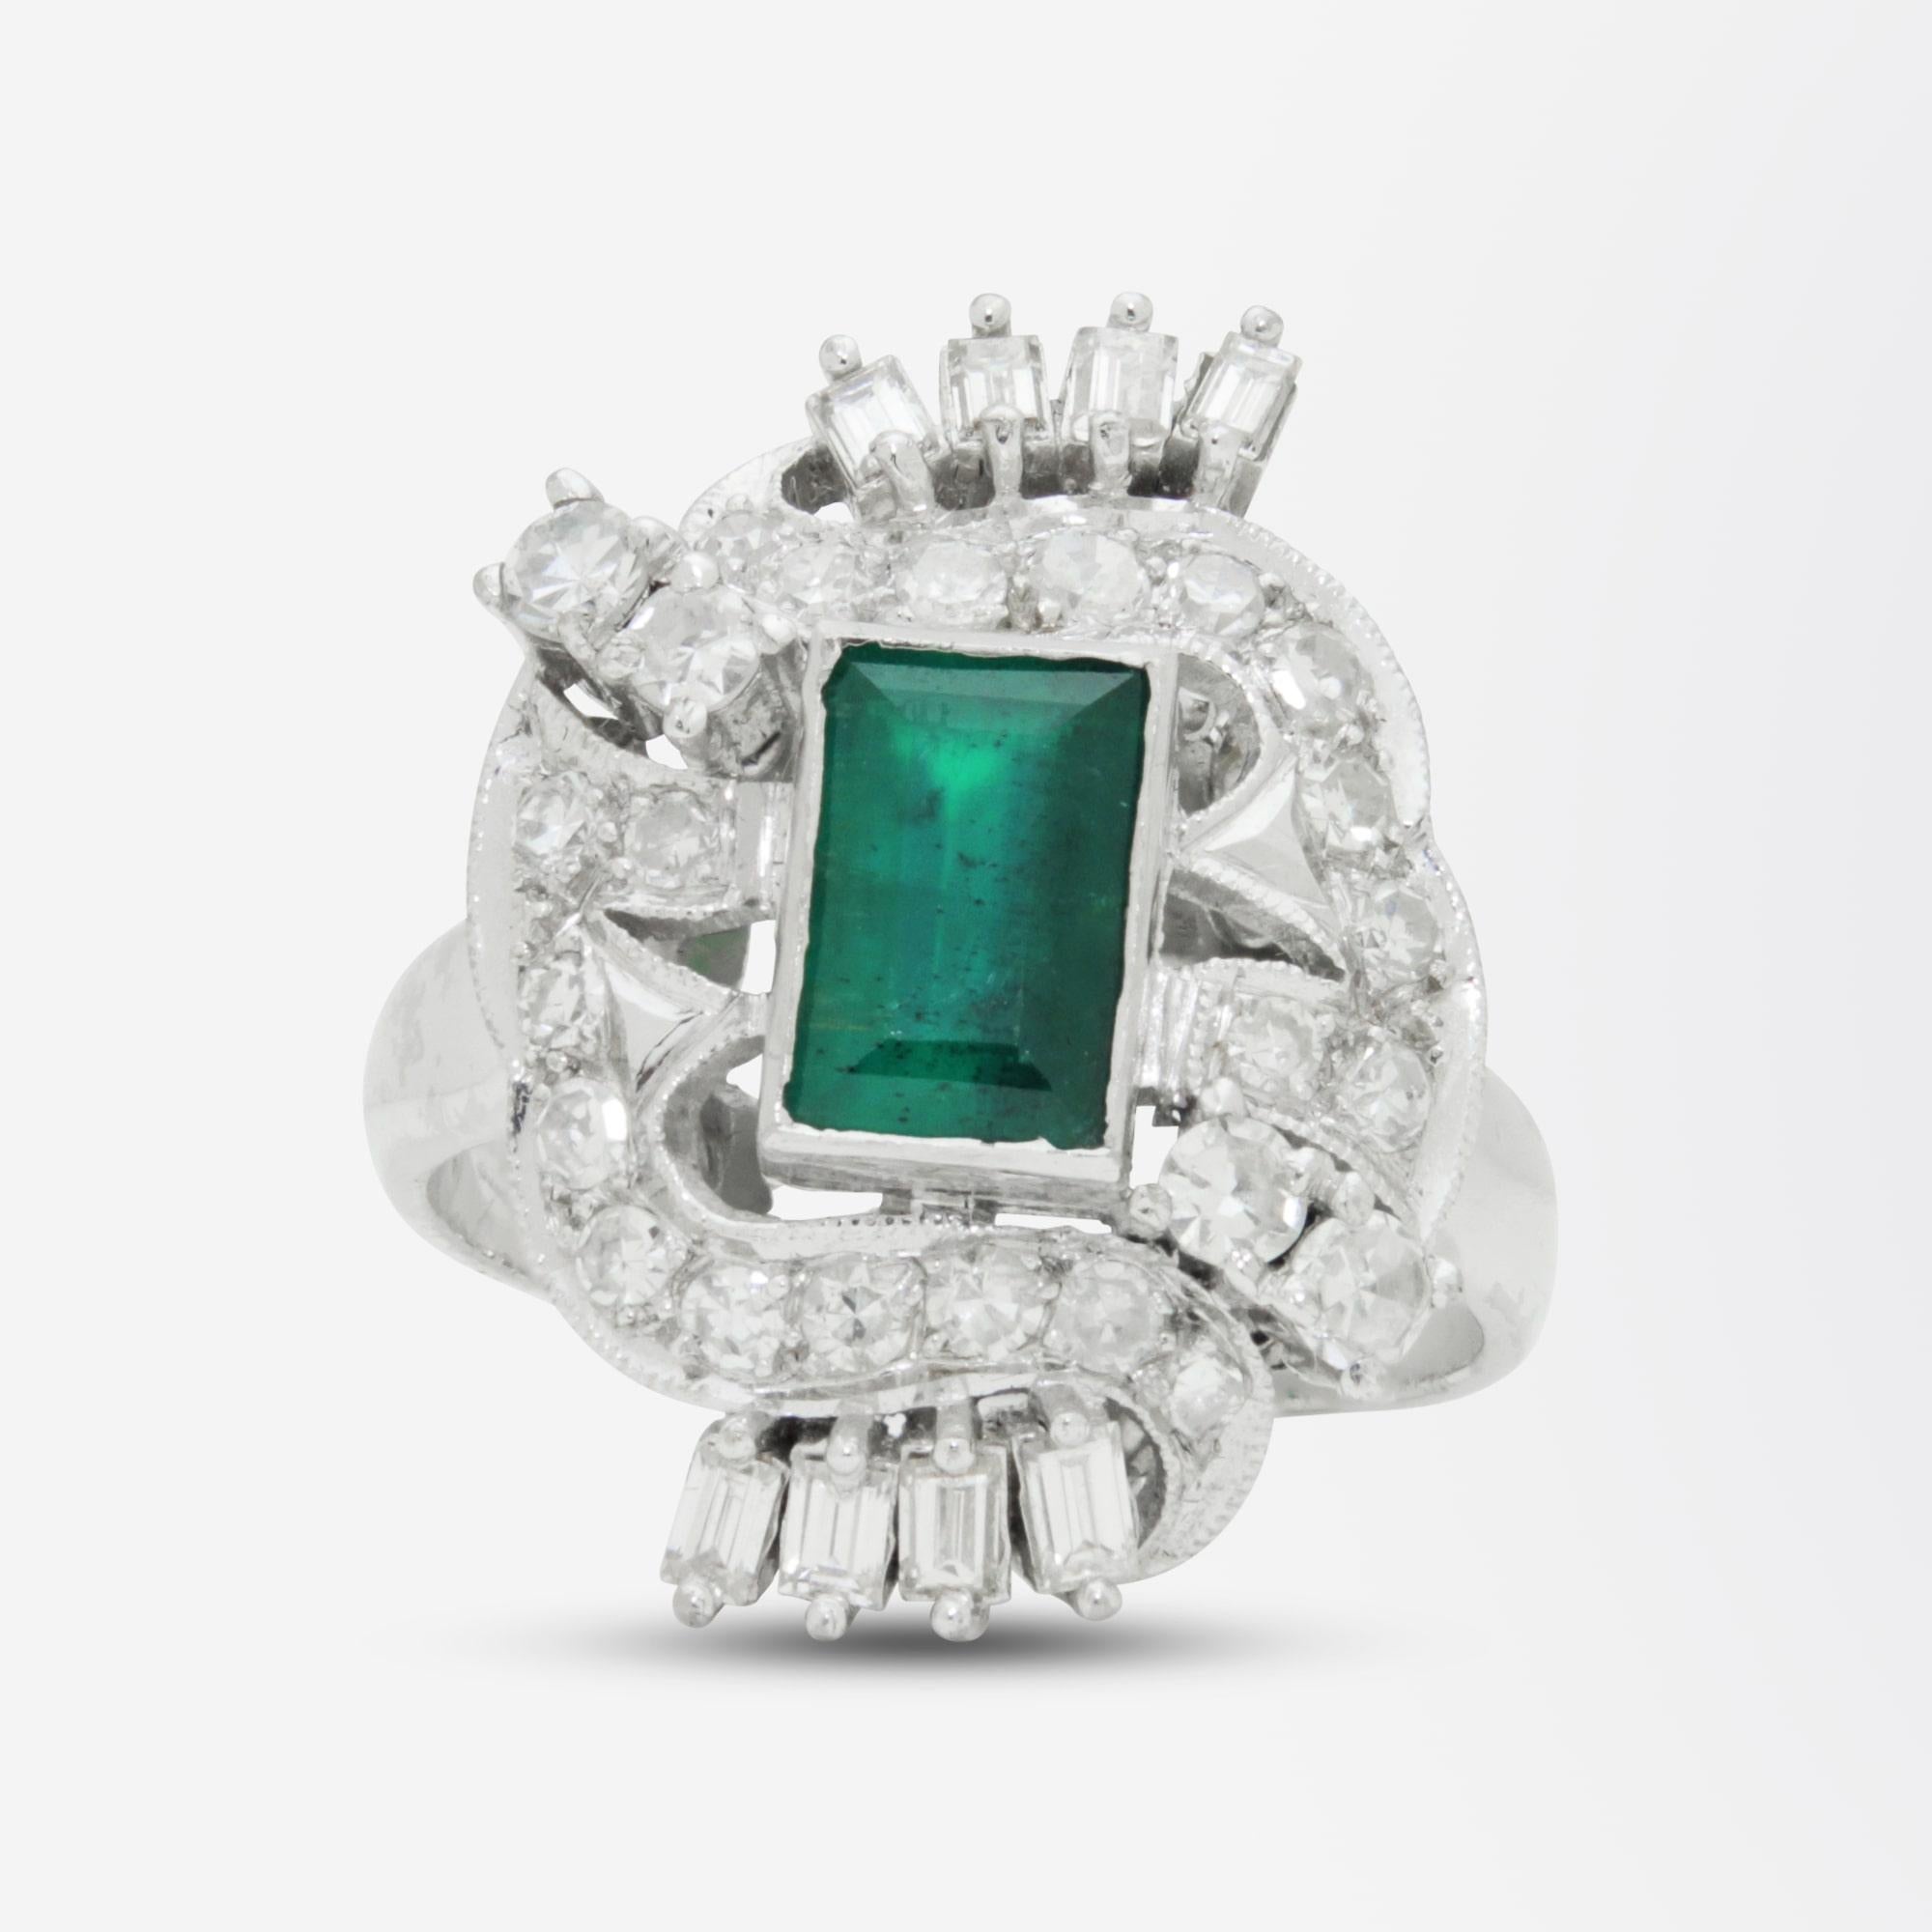 A beautifully crafted cocktail ring from the Retro Period of the 20th Century. This piece hand crafted from platinum centres on an octagonal cut emerald weighing 1.25 carat set in a rub-over setting. Surrounding this emerald is a sea of single cut